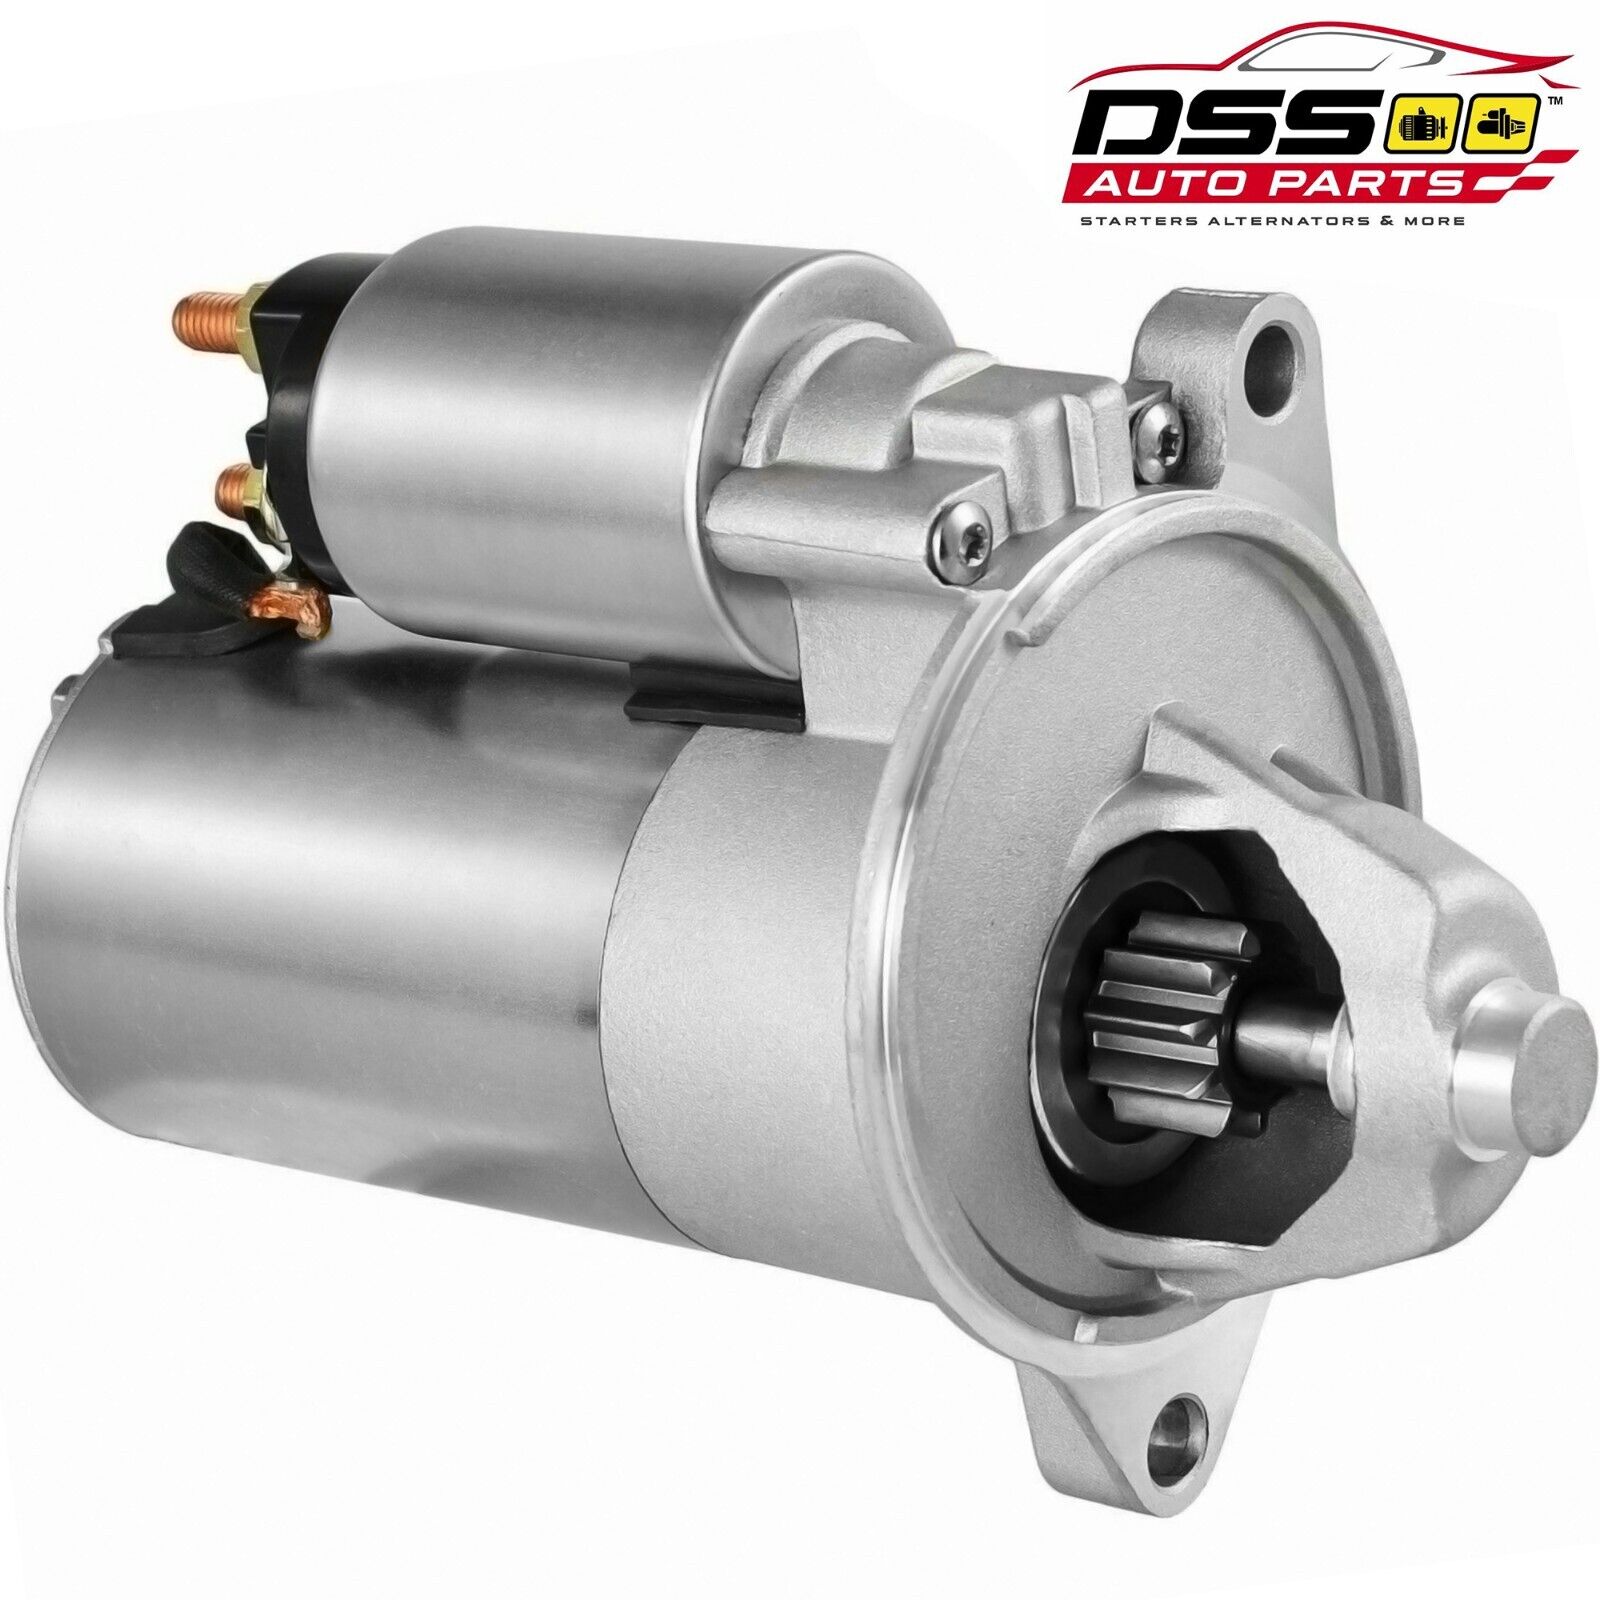 Starter High Torque for Ford 5.0L 302 5.8L 351 w/AT Trans 5 Speed Mustang 3205